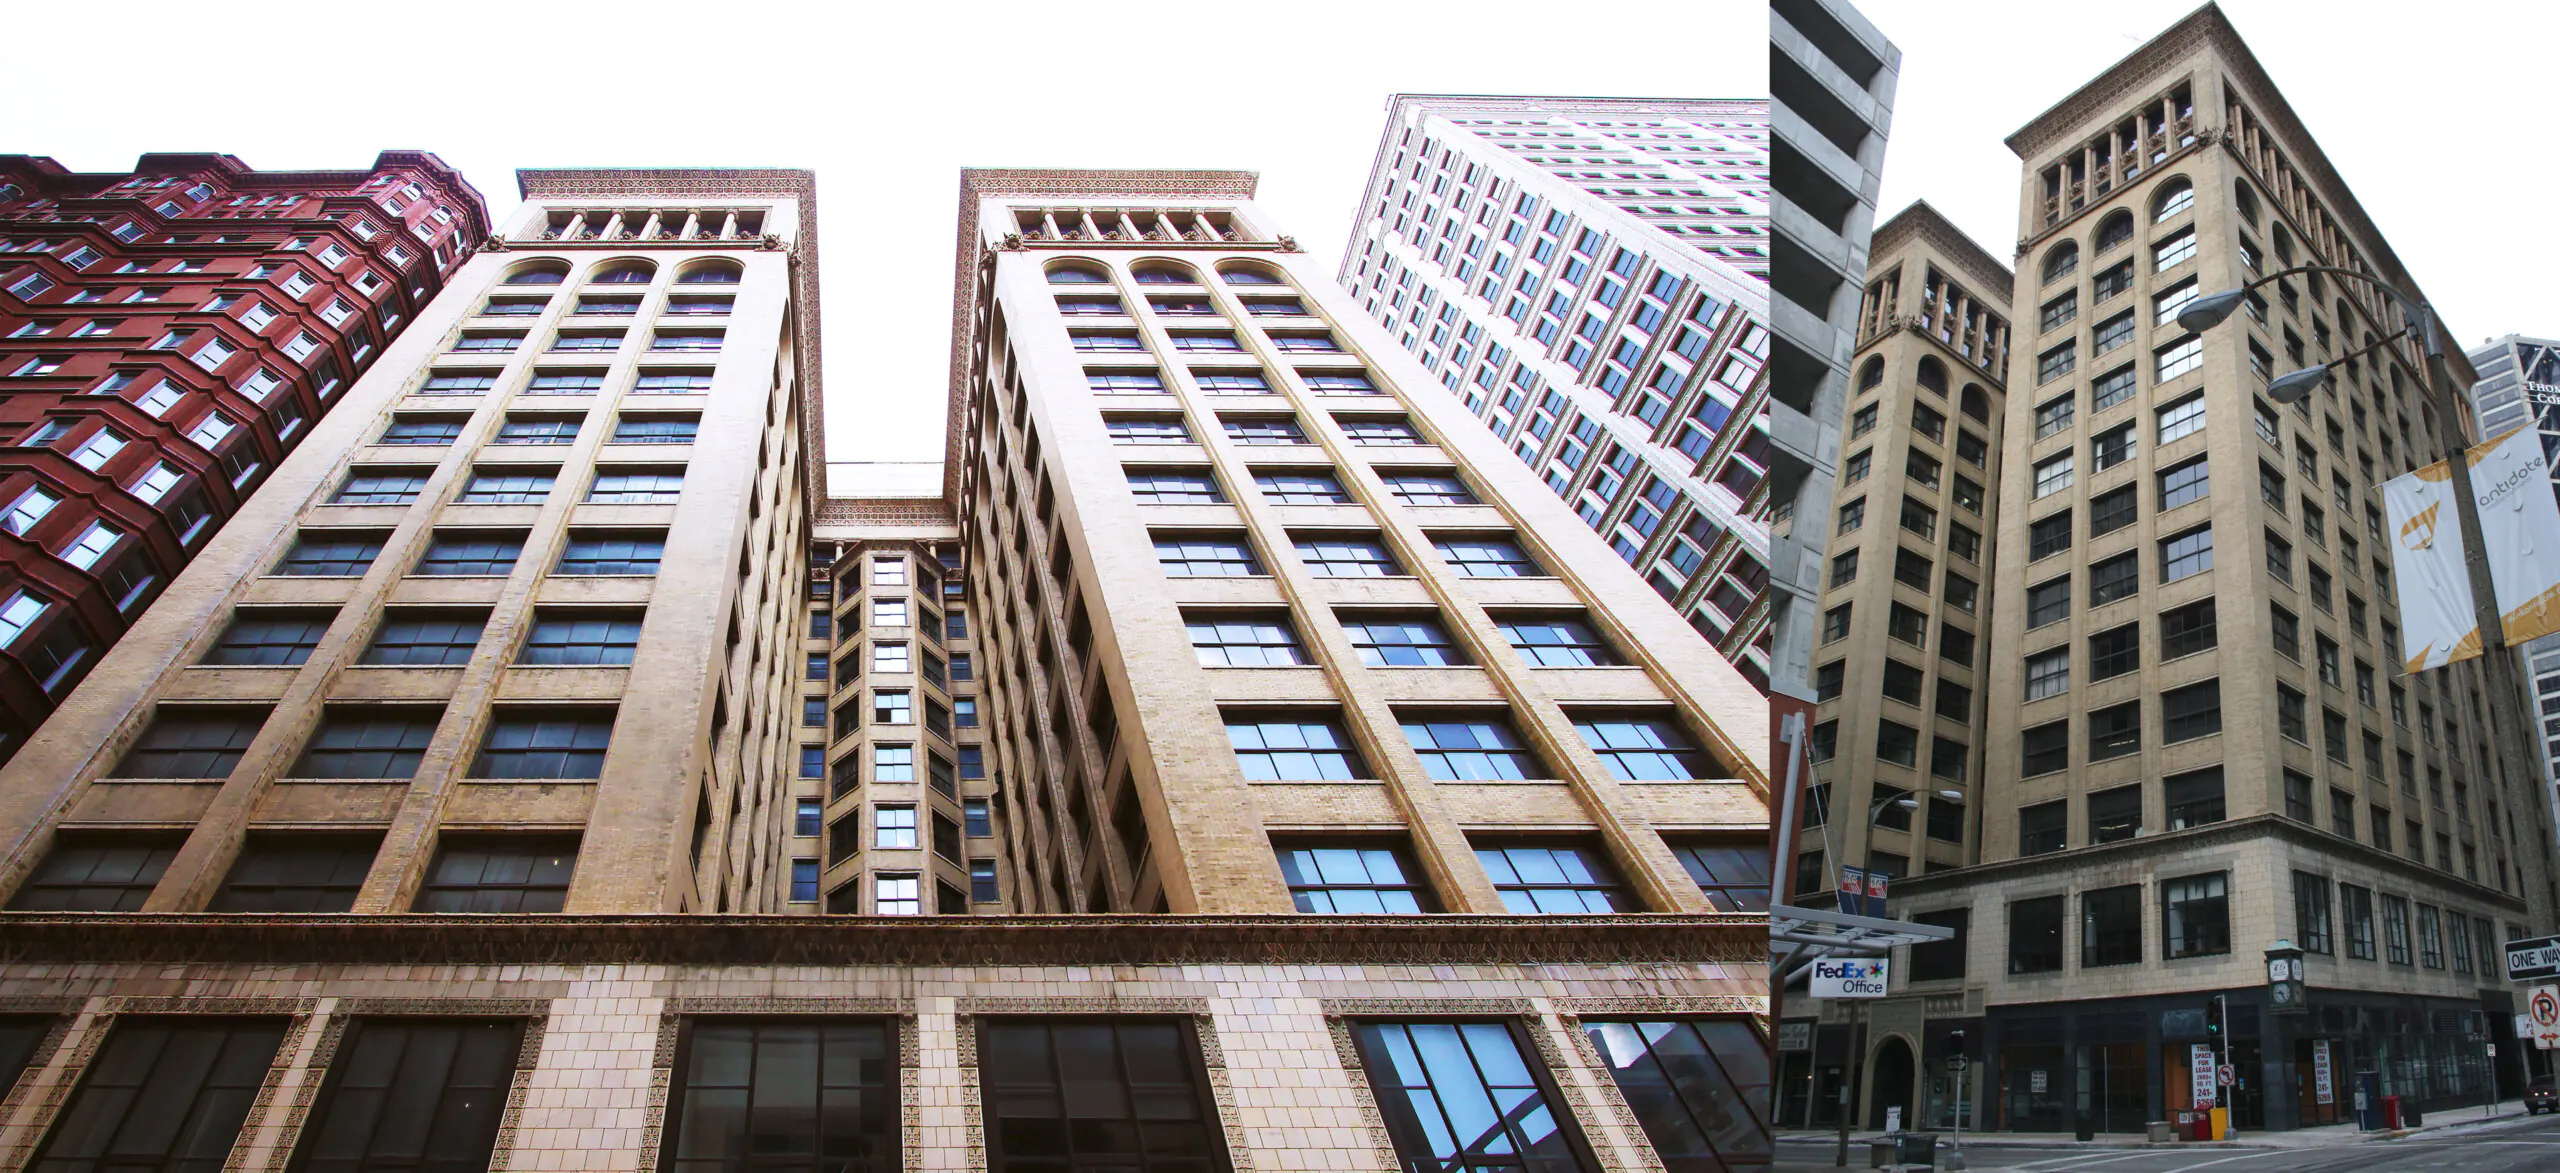 15 Projects by "Father of Skyscrapers" Louis Sullivan - Union Trust Building